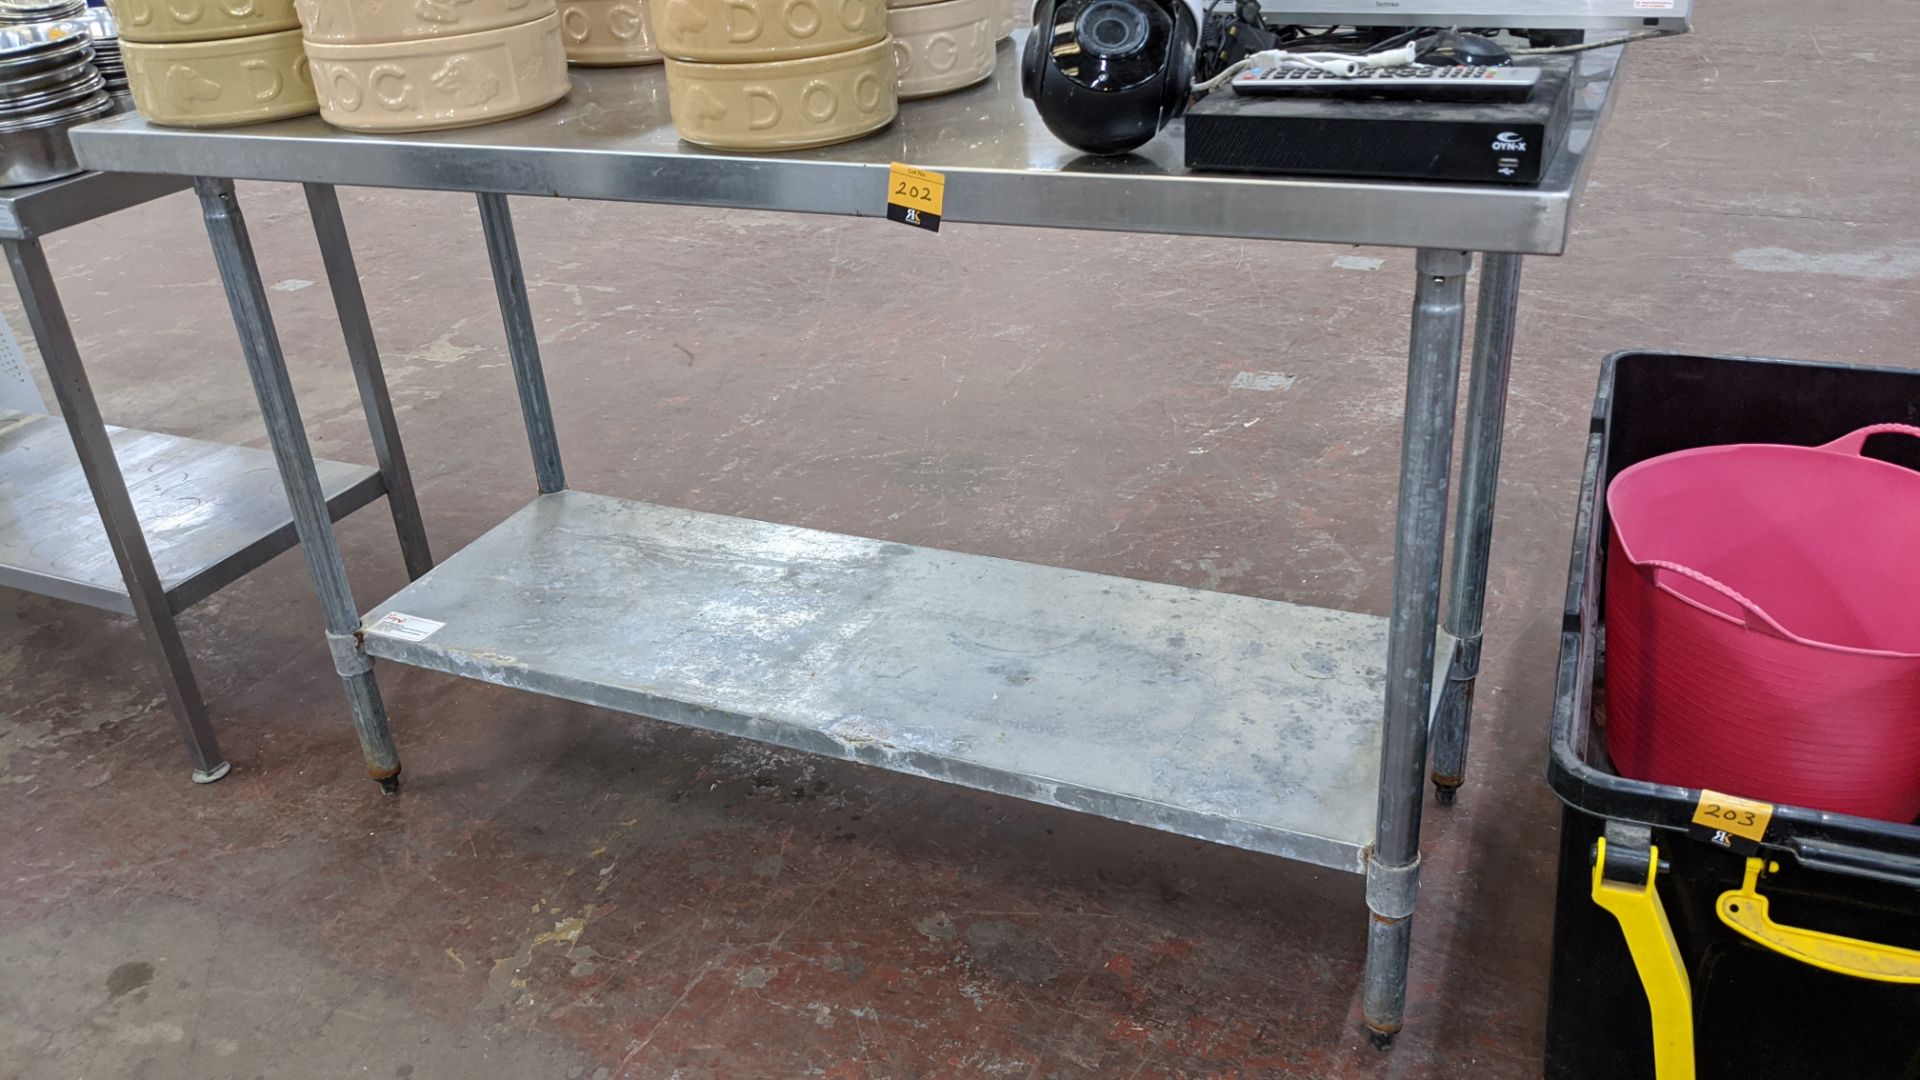 Twin tier stainless steel table measuring approximately 60" length, 24" depth, 36" height - Image 2 of 3